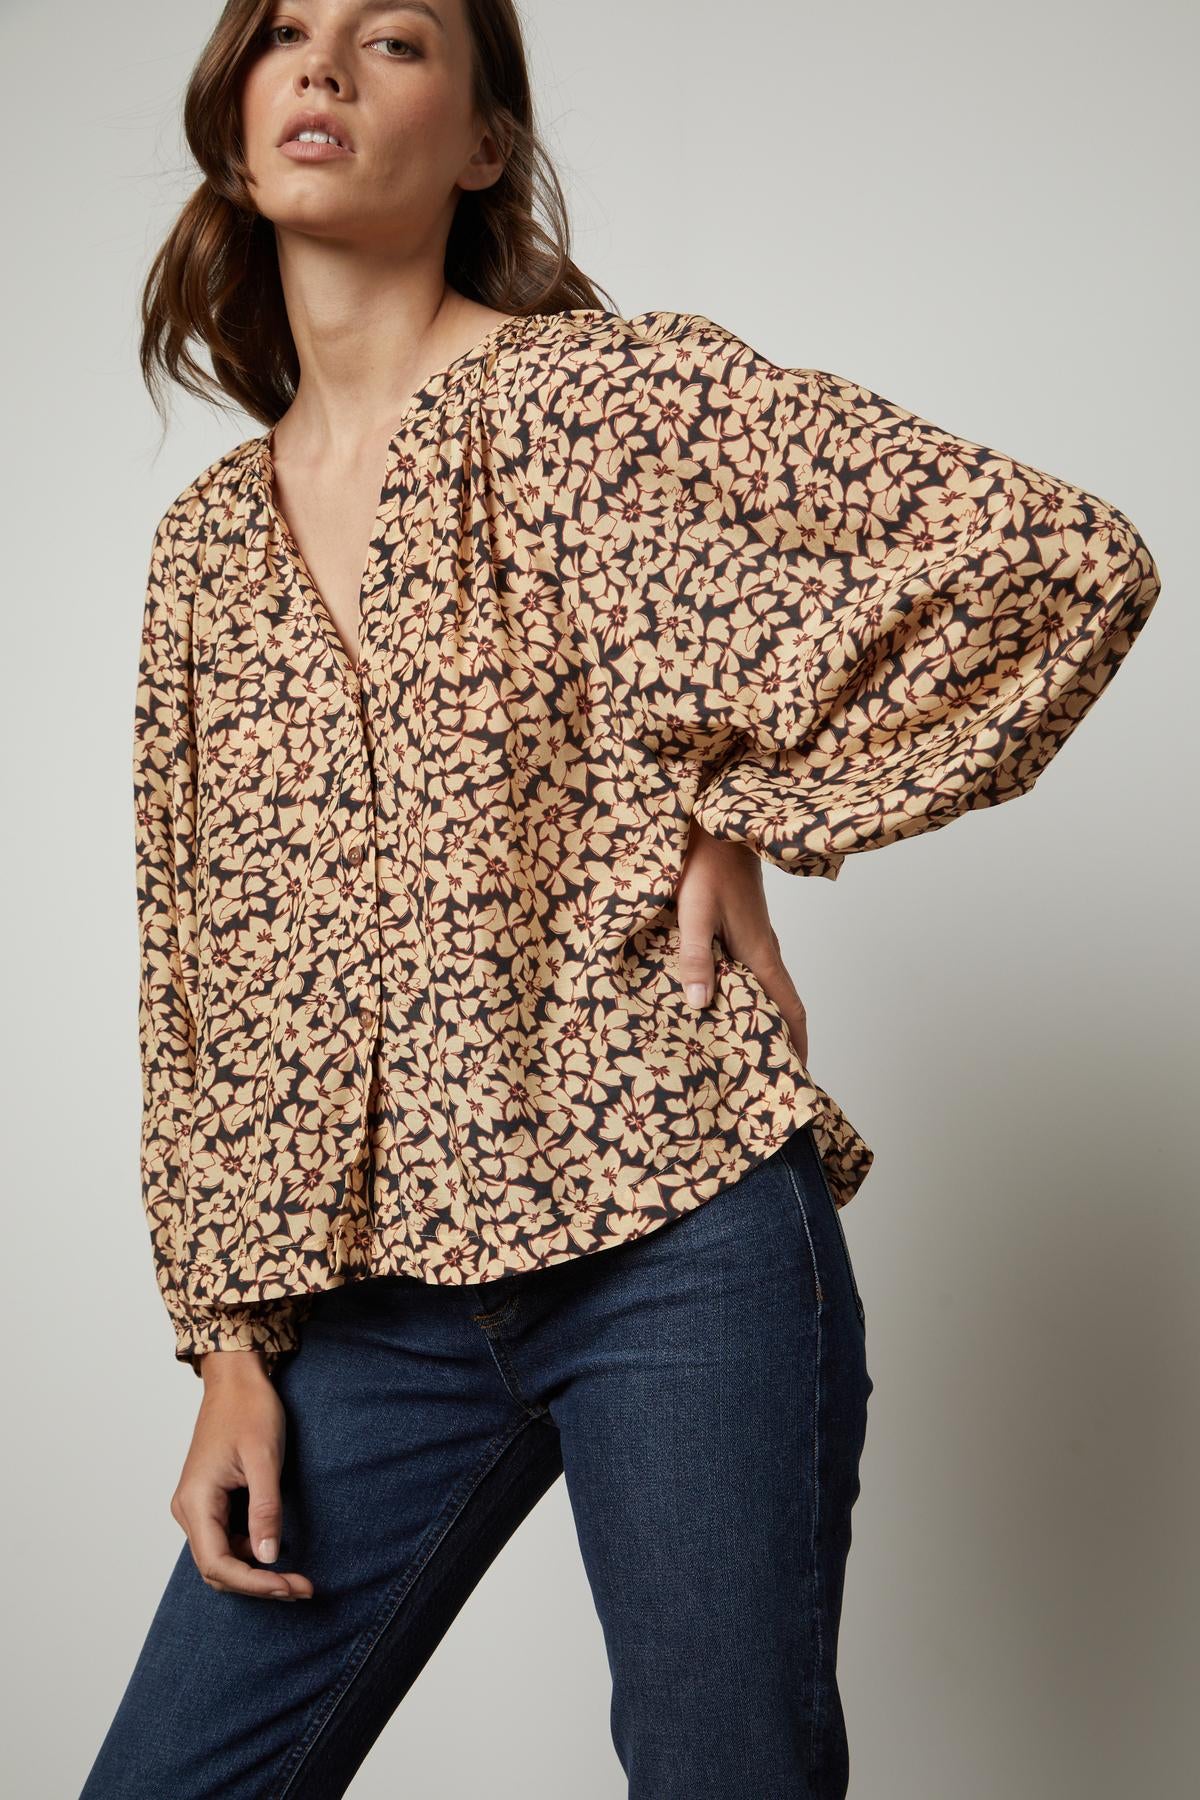 The model is wearing jeans and a MELINDA PRINTED BUTTON-UP TOP by Velvet by Graham & Spencer with a floral print.-26895474426049